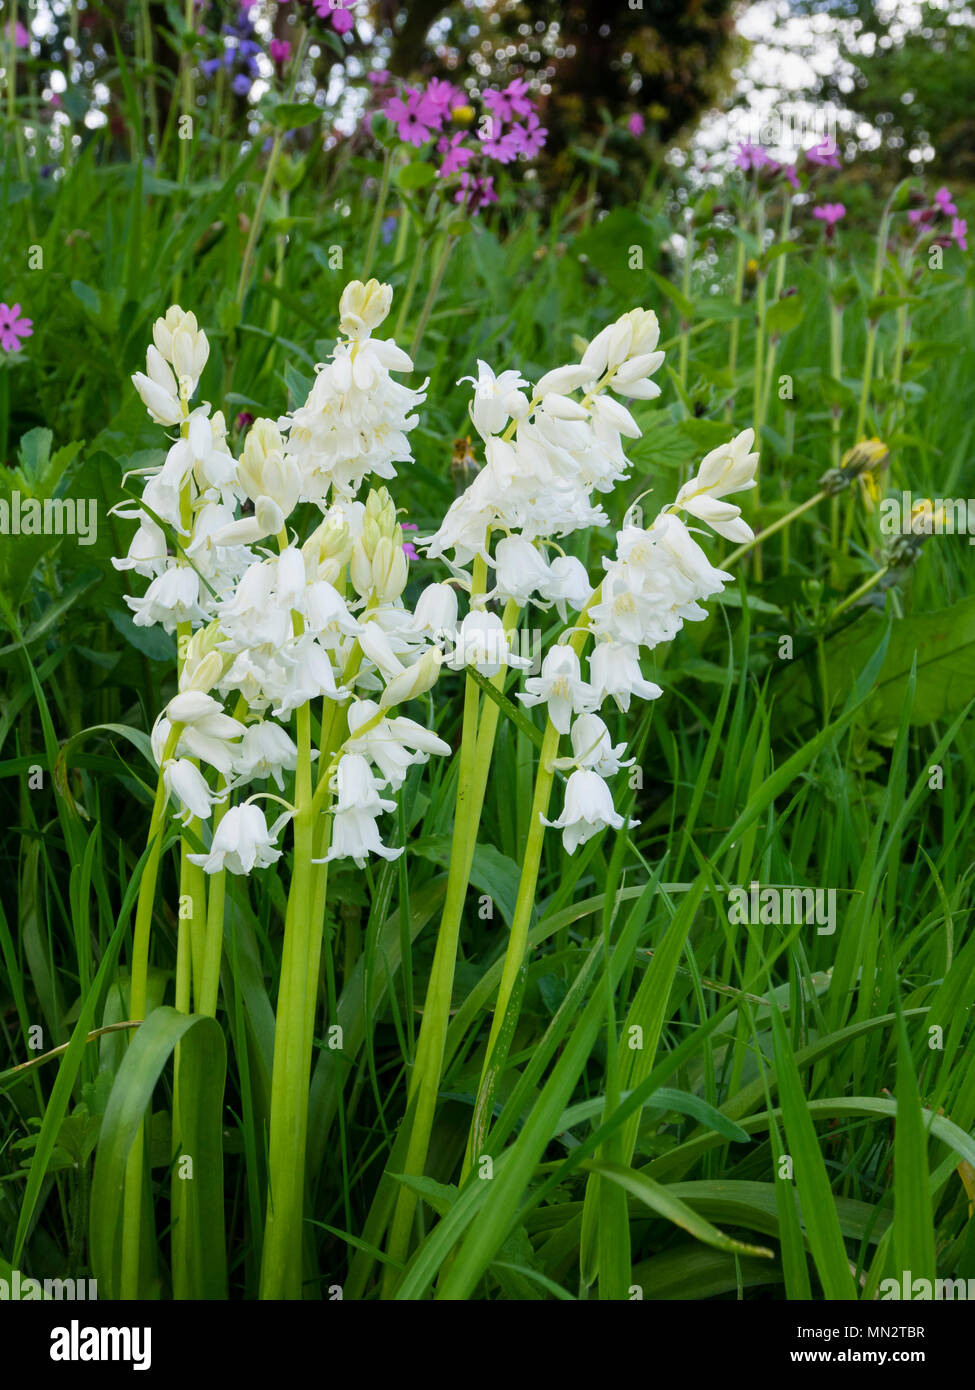 White form of the hybrid cross between the English and Spanish bluebell, Hyacinthoides x massartiana 'Alba' naturalised in a meadow Stock Photo